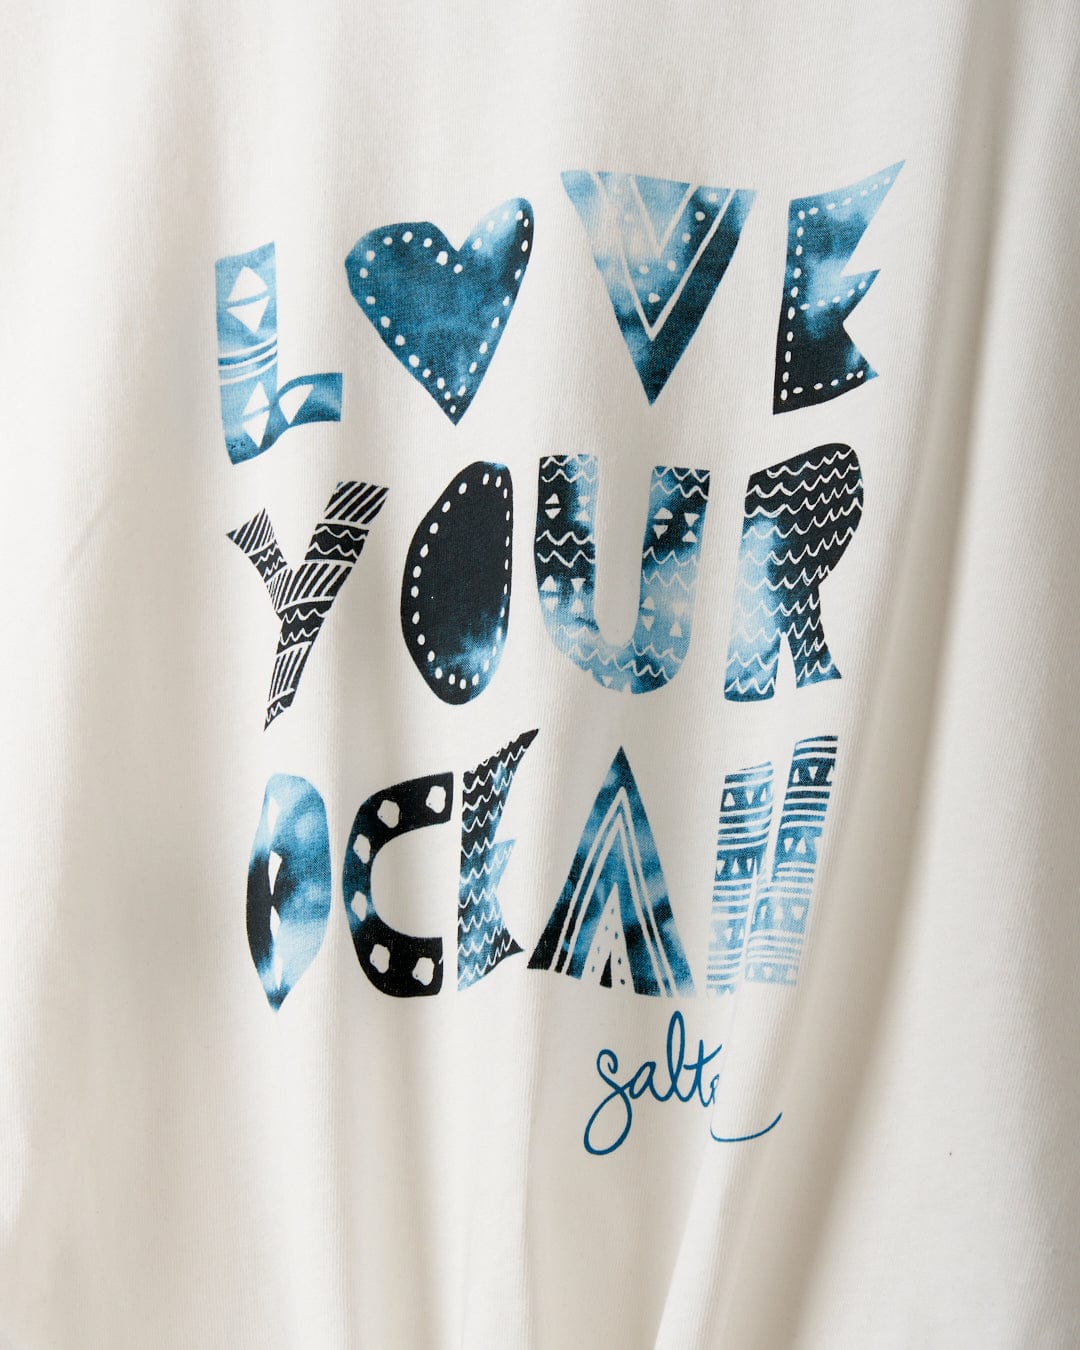 White fabric with the words "LOVE YOUR OCEAN" printed in various blue patterned letters. The word "Saltrock" is written at the bottom in blue script. Made from recycled material, this loose fit tee offers both comfort and a message of sustainability. This is the Love Your Ocean - Recycled Womens T-Shirt - White by Saltrock.